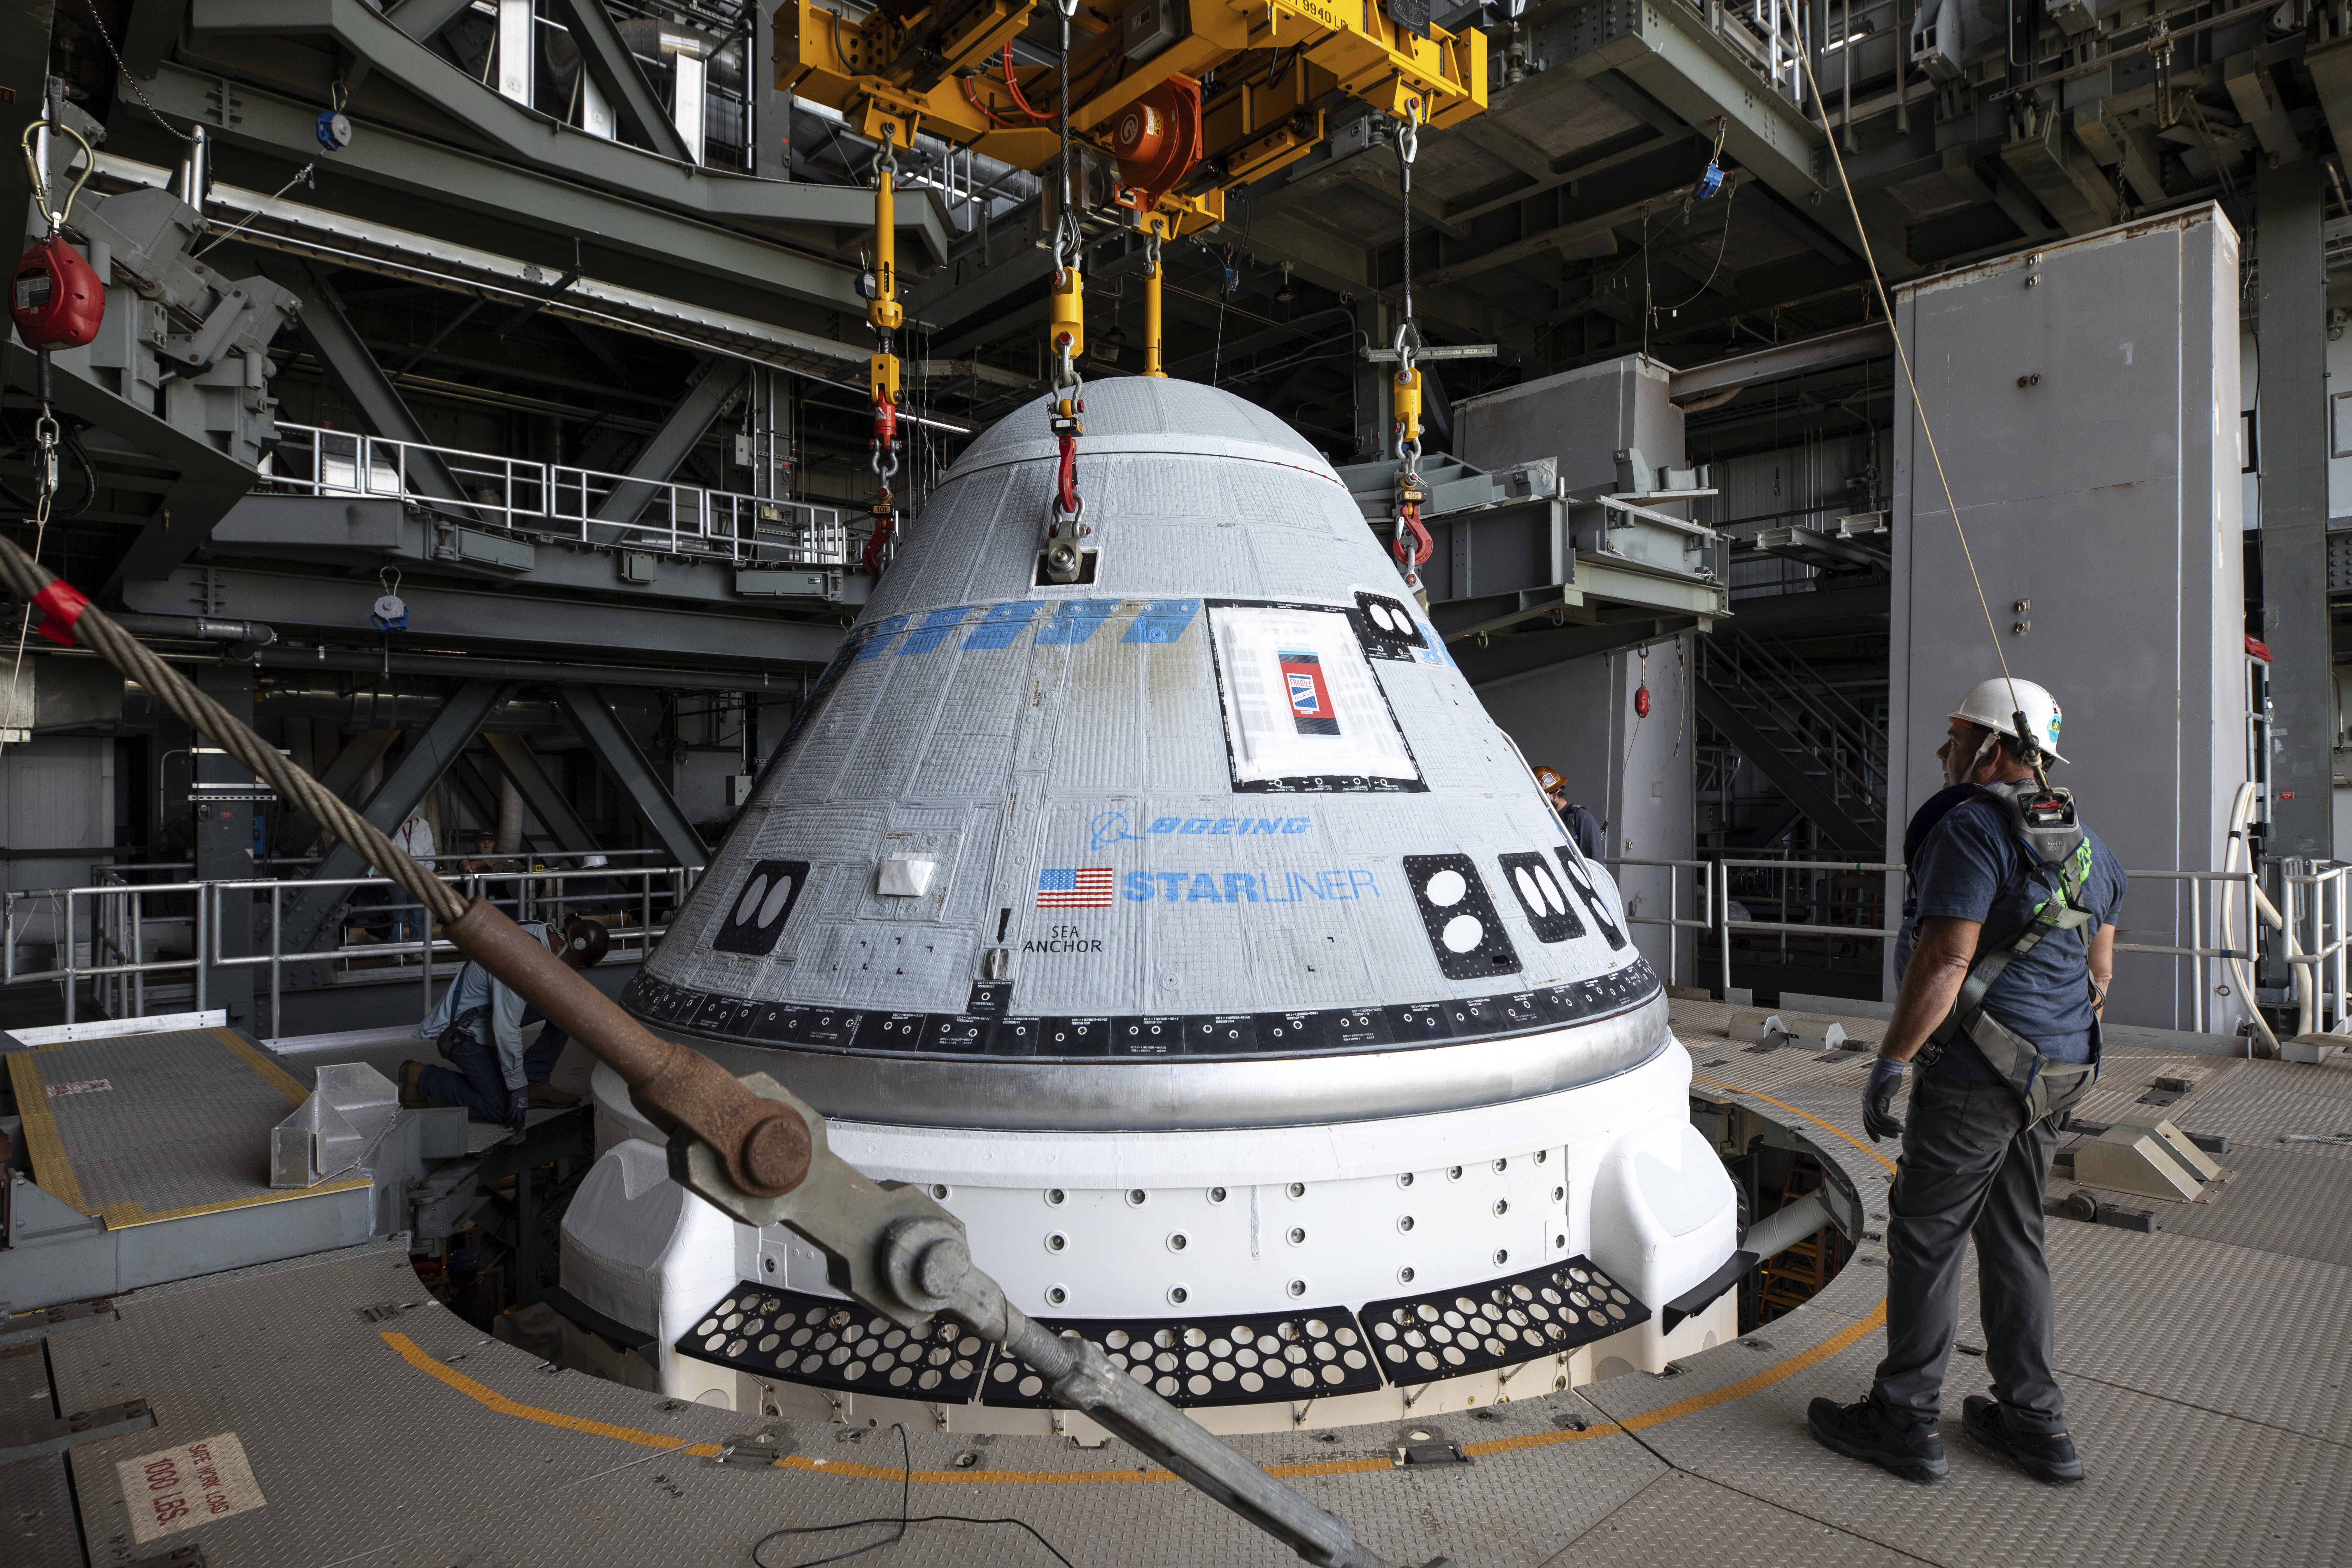 Boeing to launch astronauts into space aboard new capsule